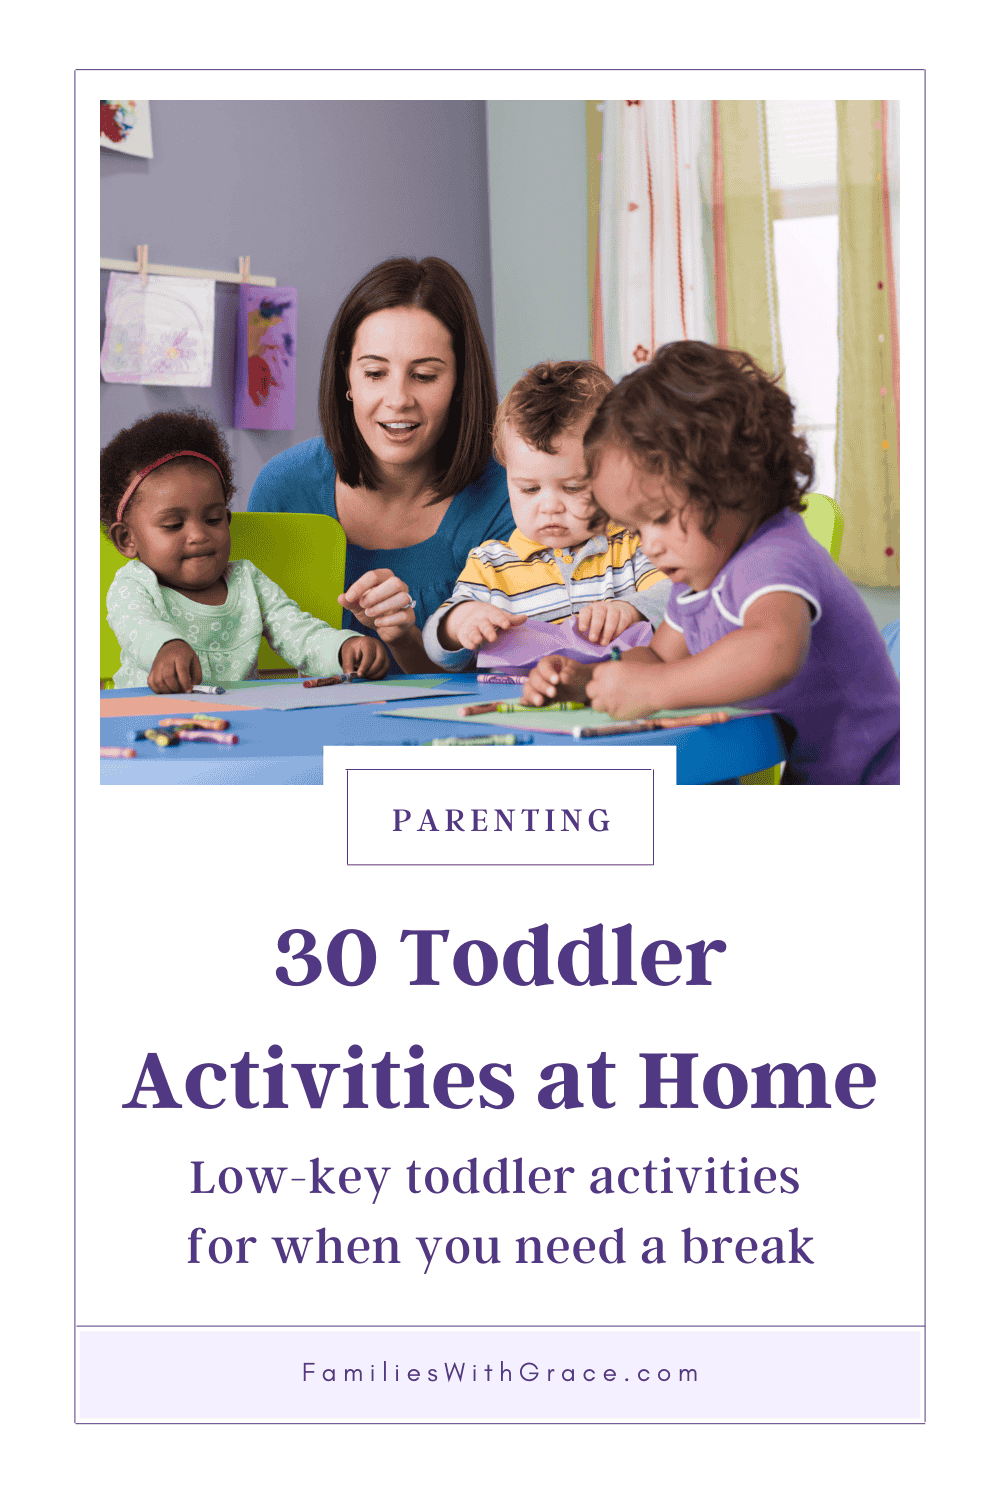 30 Toddler activities at home